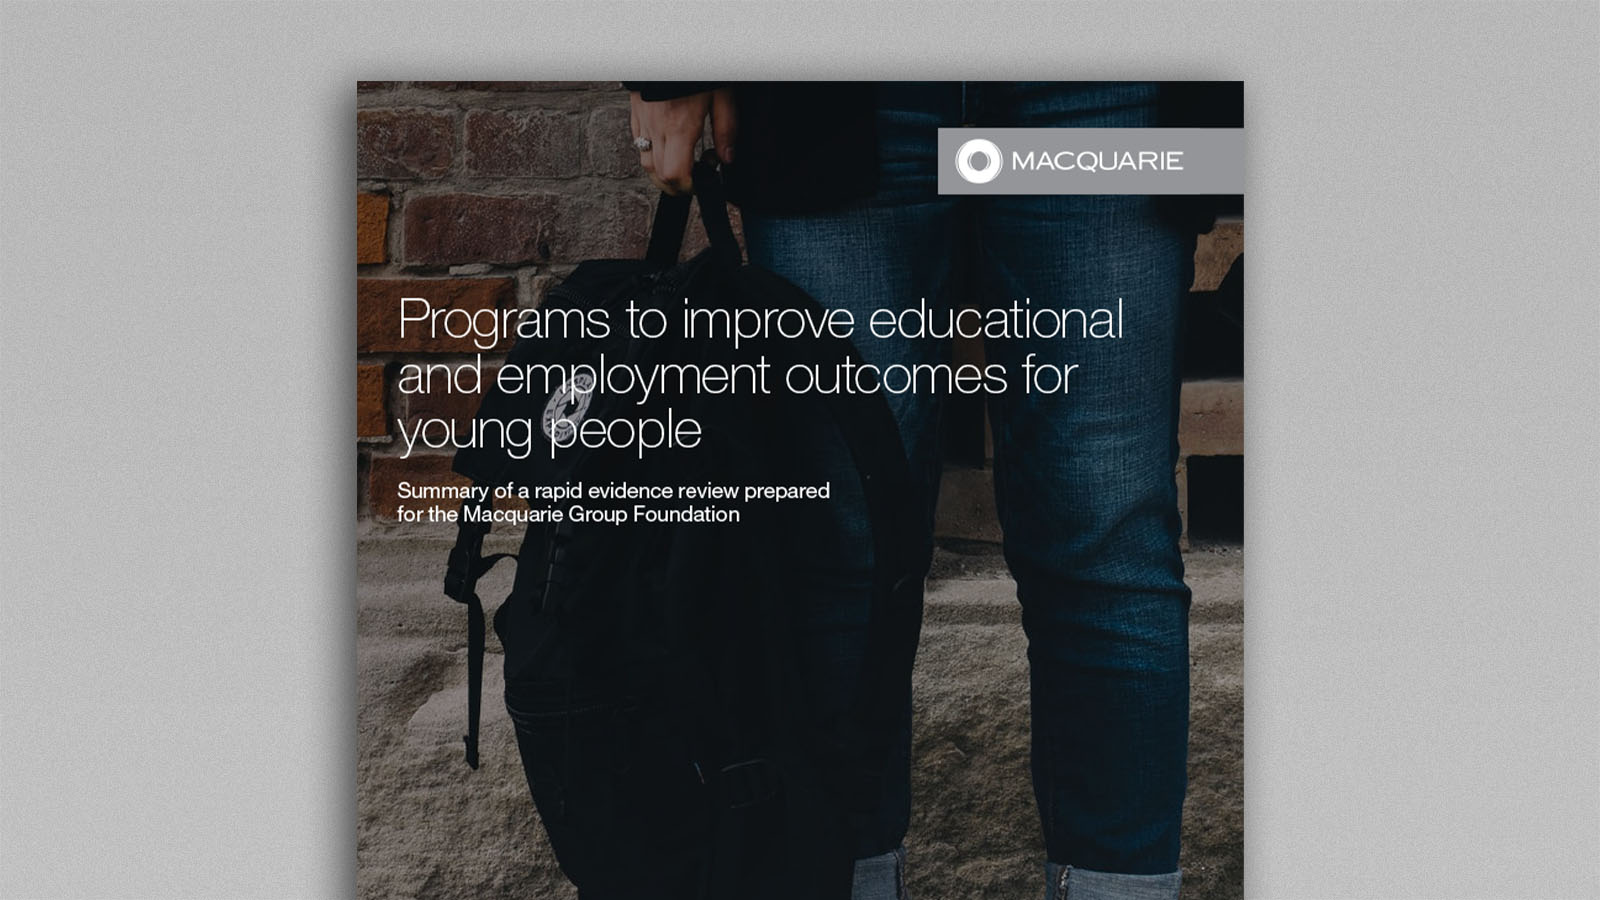 page-cover-programs-improve-educational-and-employment-outcomes-young-people_16-9.jpg